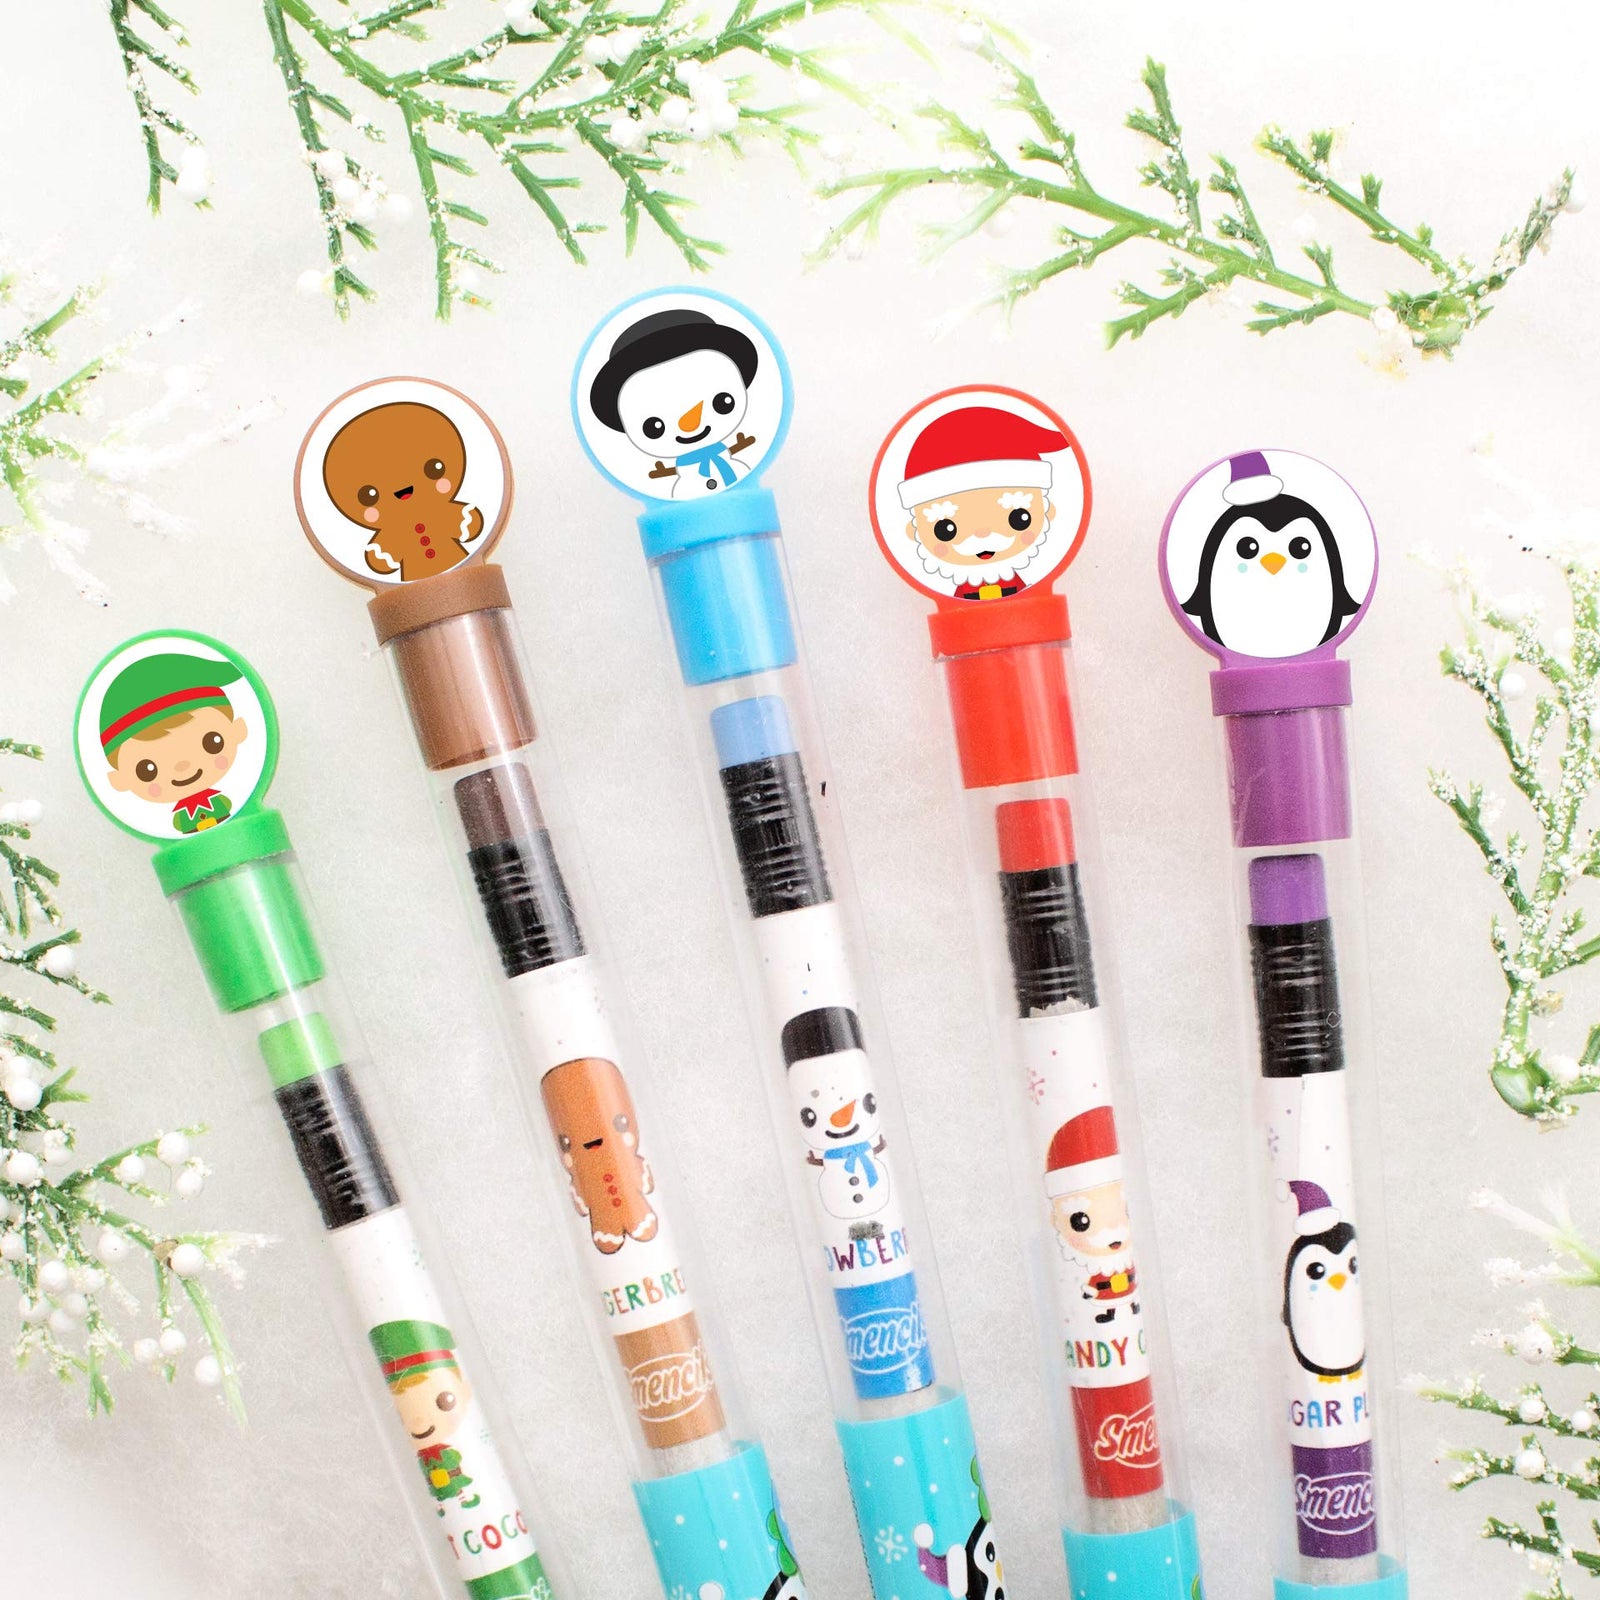 Holiday Smencils - HB #2 Scented Fun Pencils, 5 Count - Stocking Stuffer, Gifts for Kids, School Supplies, Party Favors, Classroom Rewards by Scentco